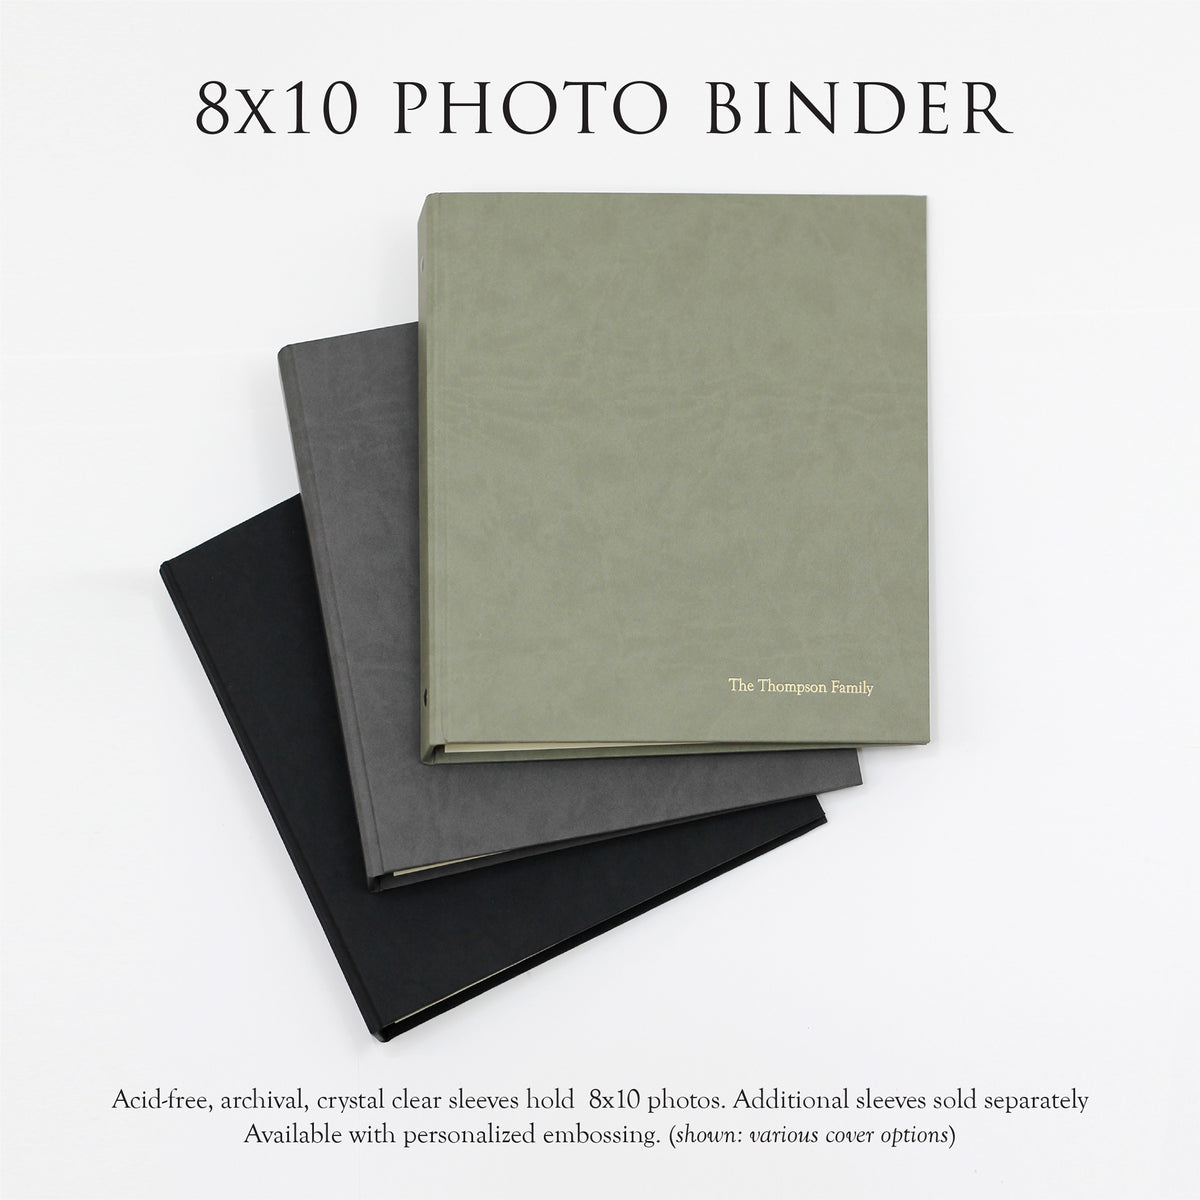 Large Photo Binder For 8x10 Photos | Cover: Celery Cotton | Available Personalized